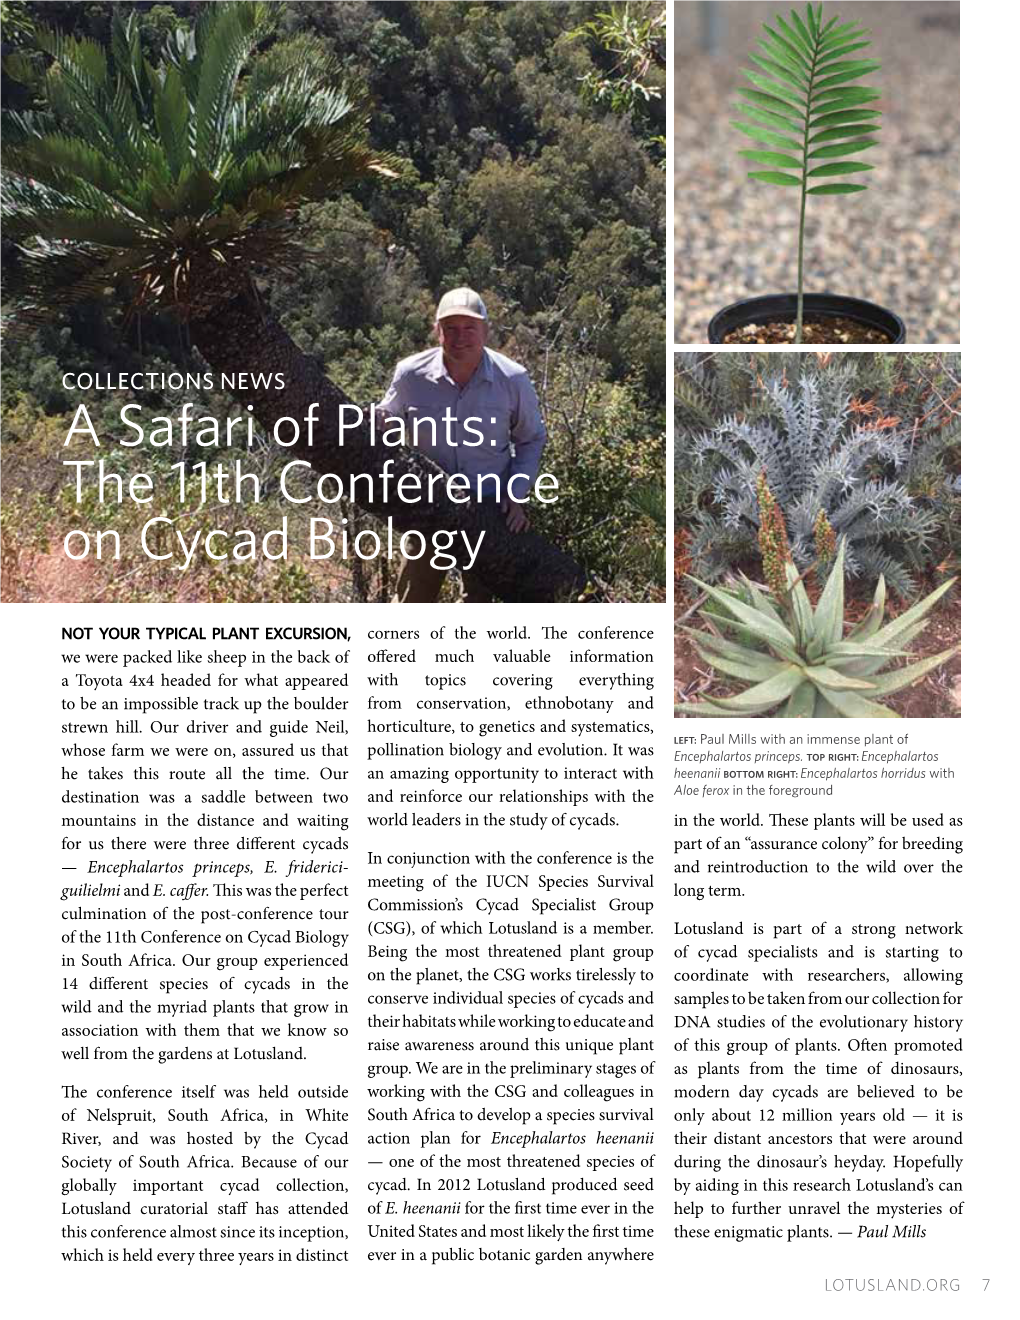 A Safari of Plants: the 11Th Conference on Cycad Biology